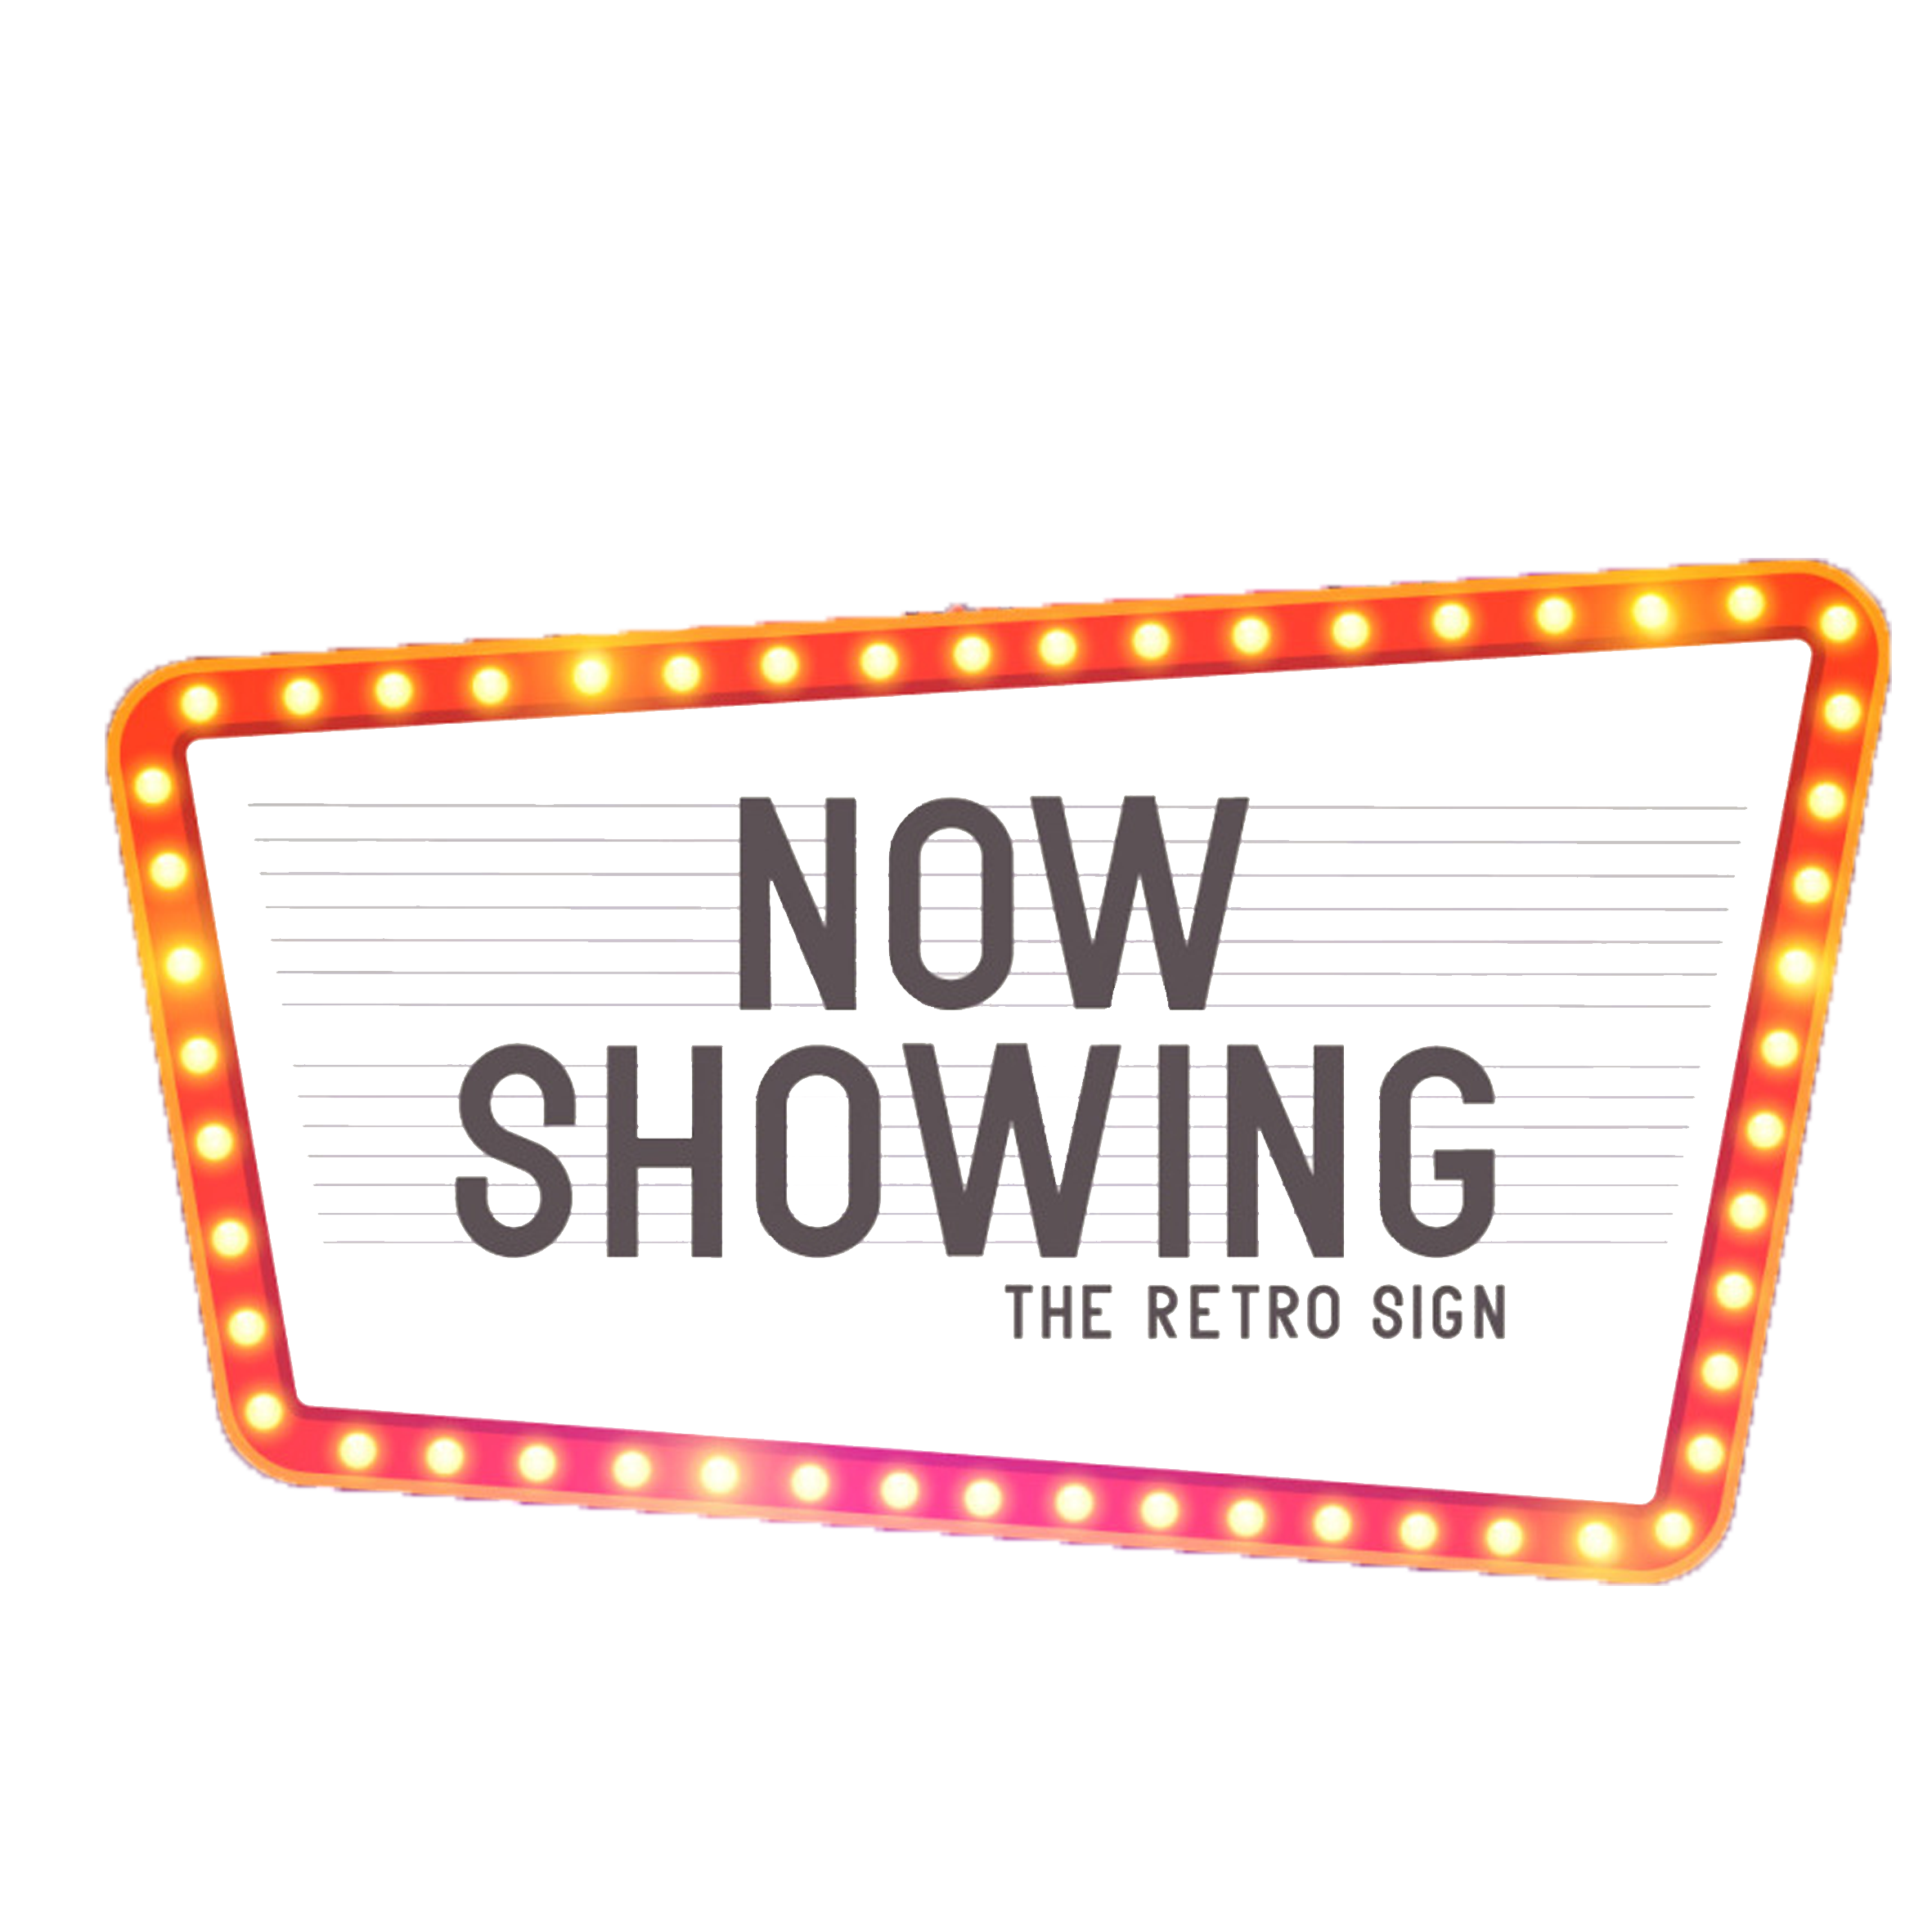 Theatre Cinema Neon Material Signboard Sign Deduction Clipart